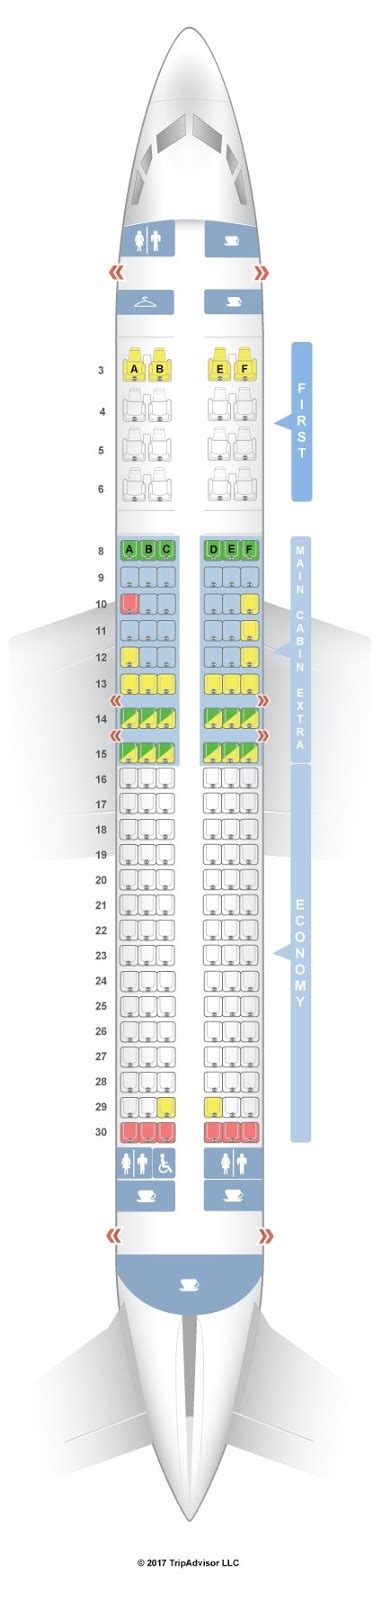 Boeing 737-800 american seat map. For your next American Airlines flight, use this seating chart to get the most comfortable seats, ... Boeing 737-800 (738) Layout 2 ... 